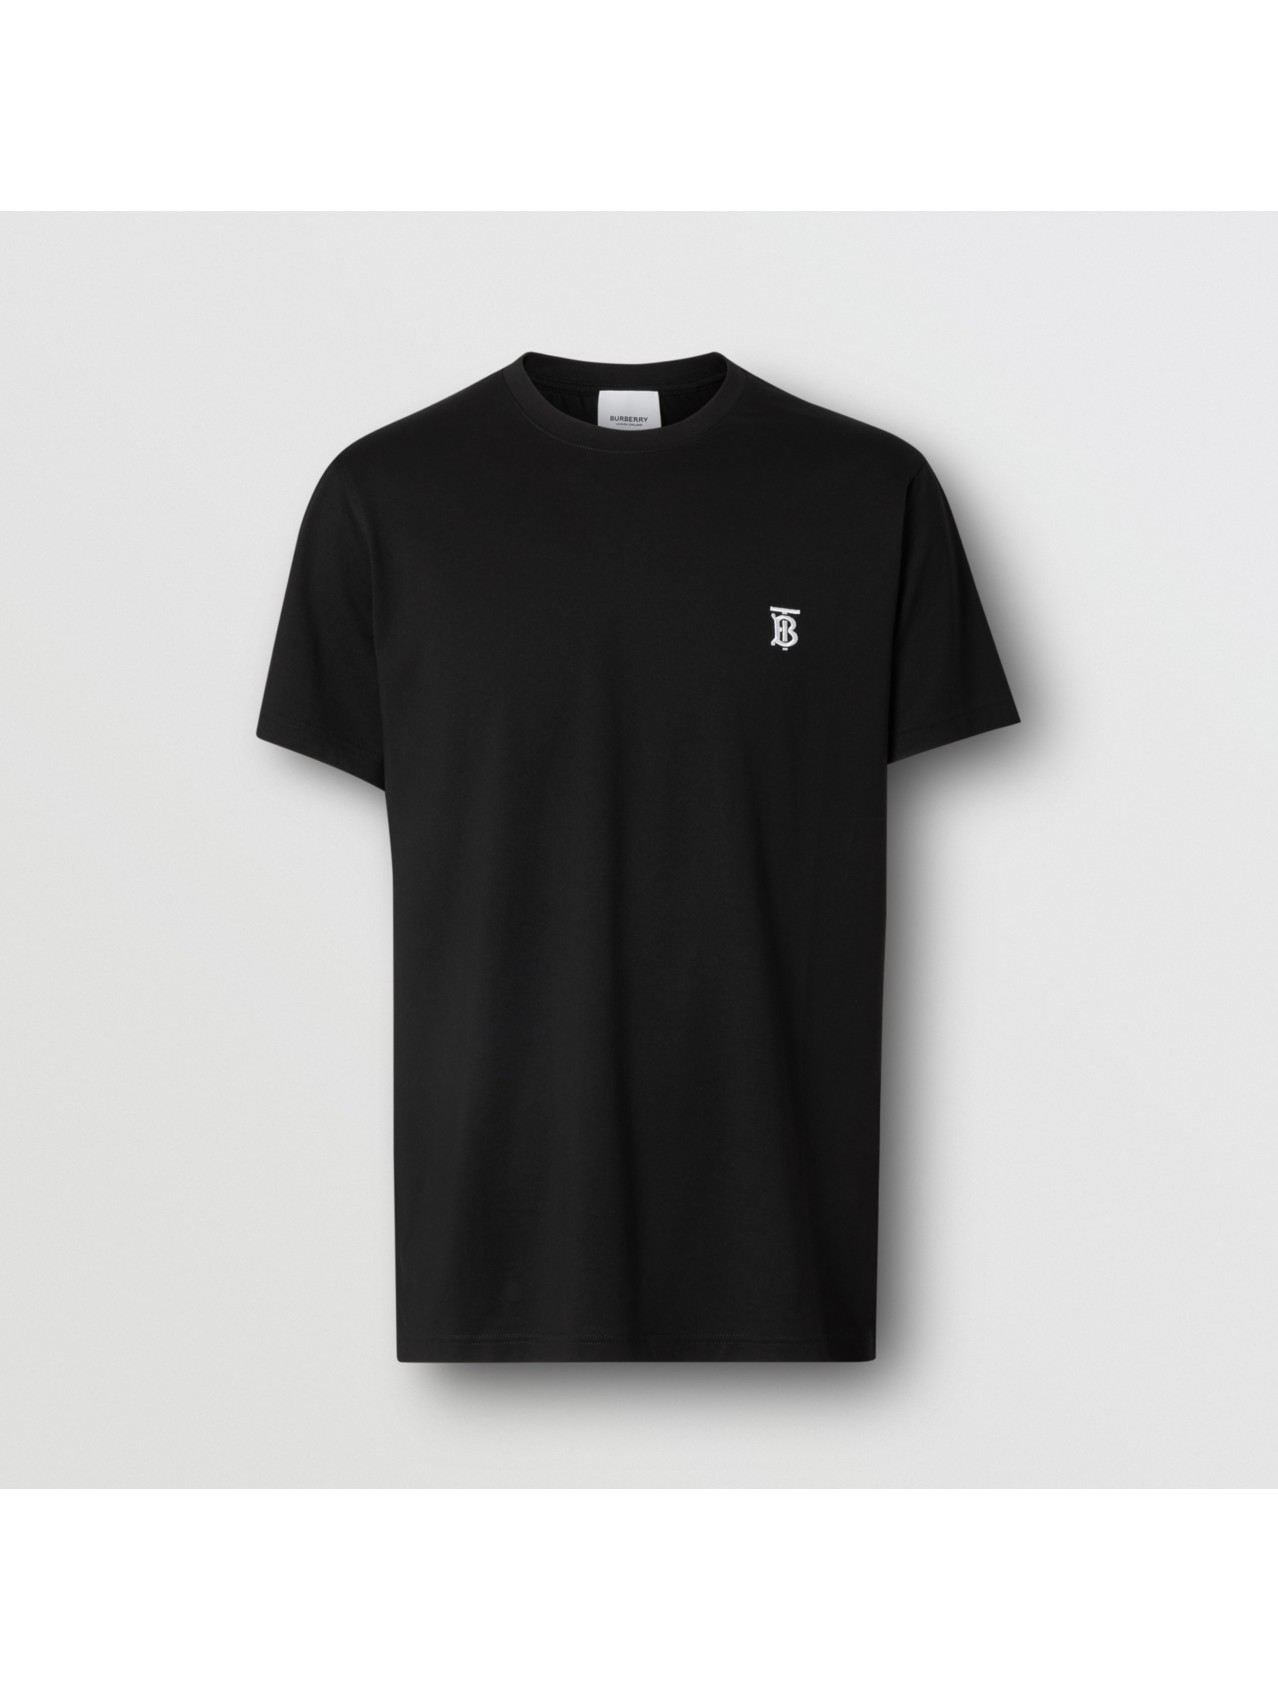 Polo Shirts & T-Shirts For Men | Burberry United States